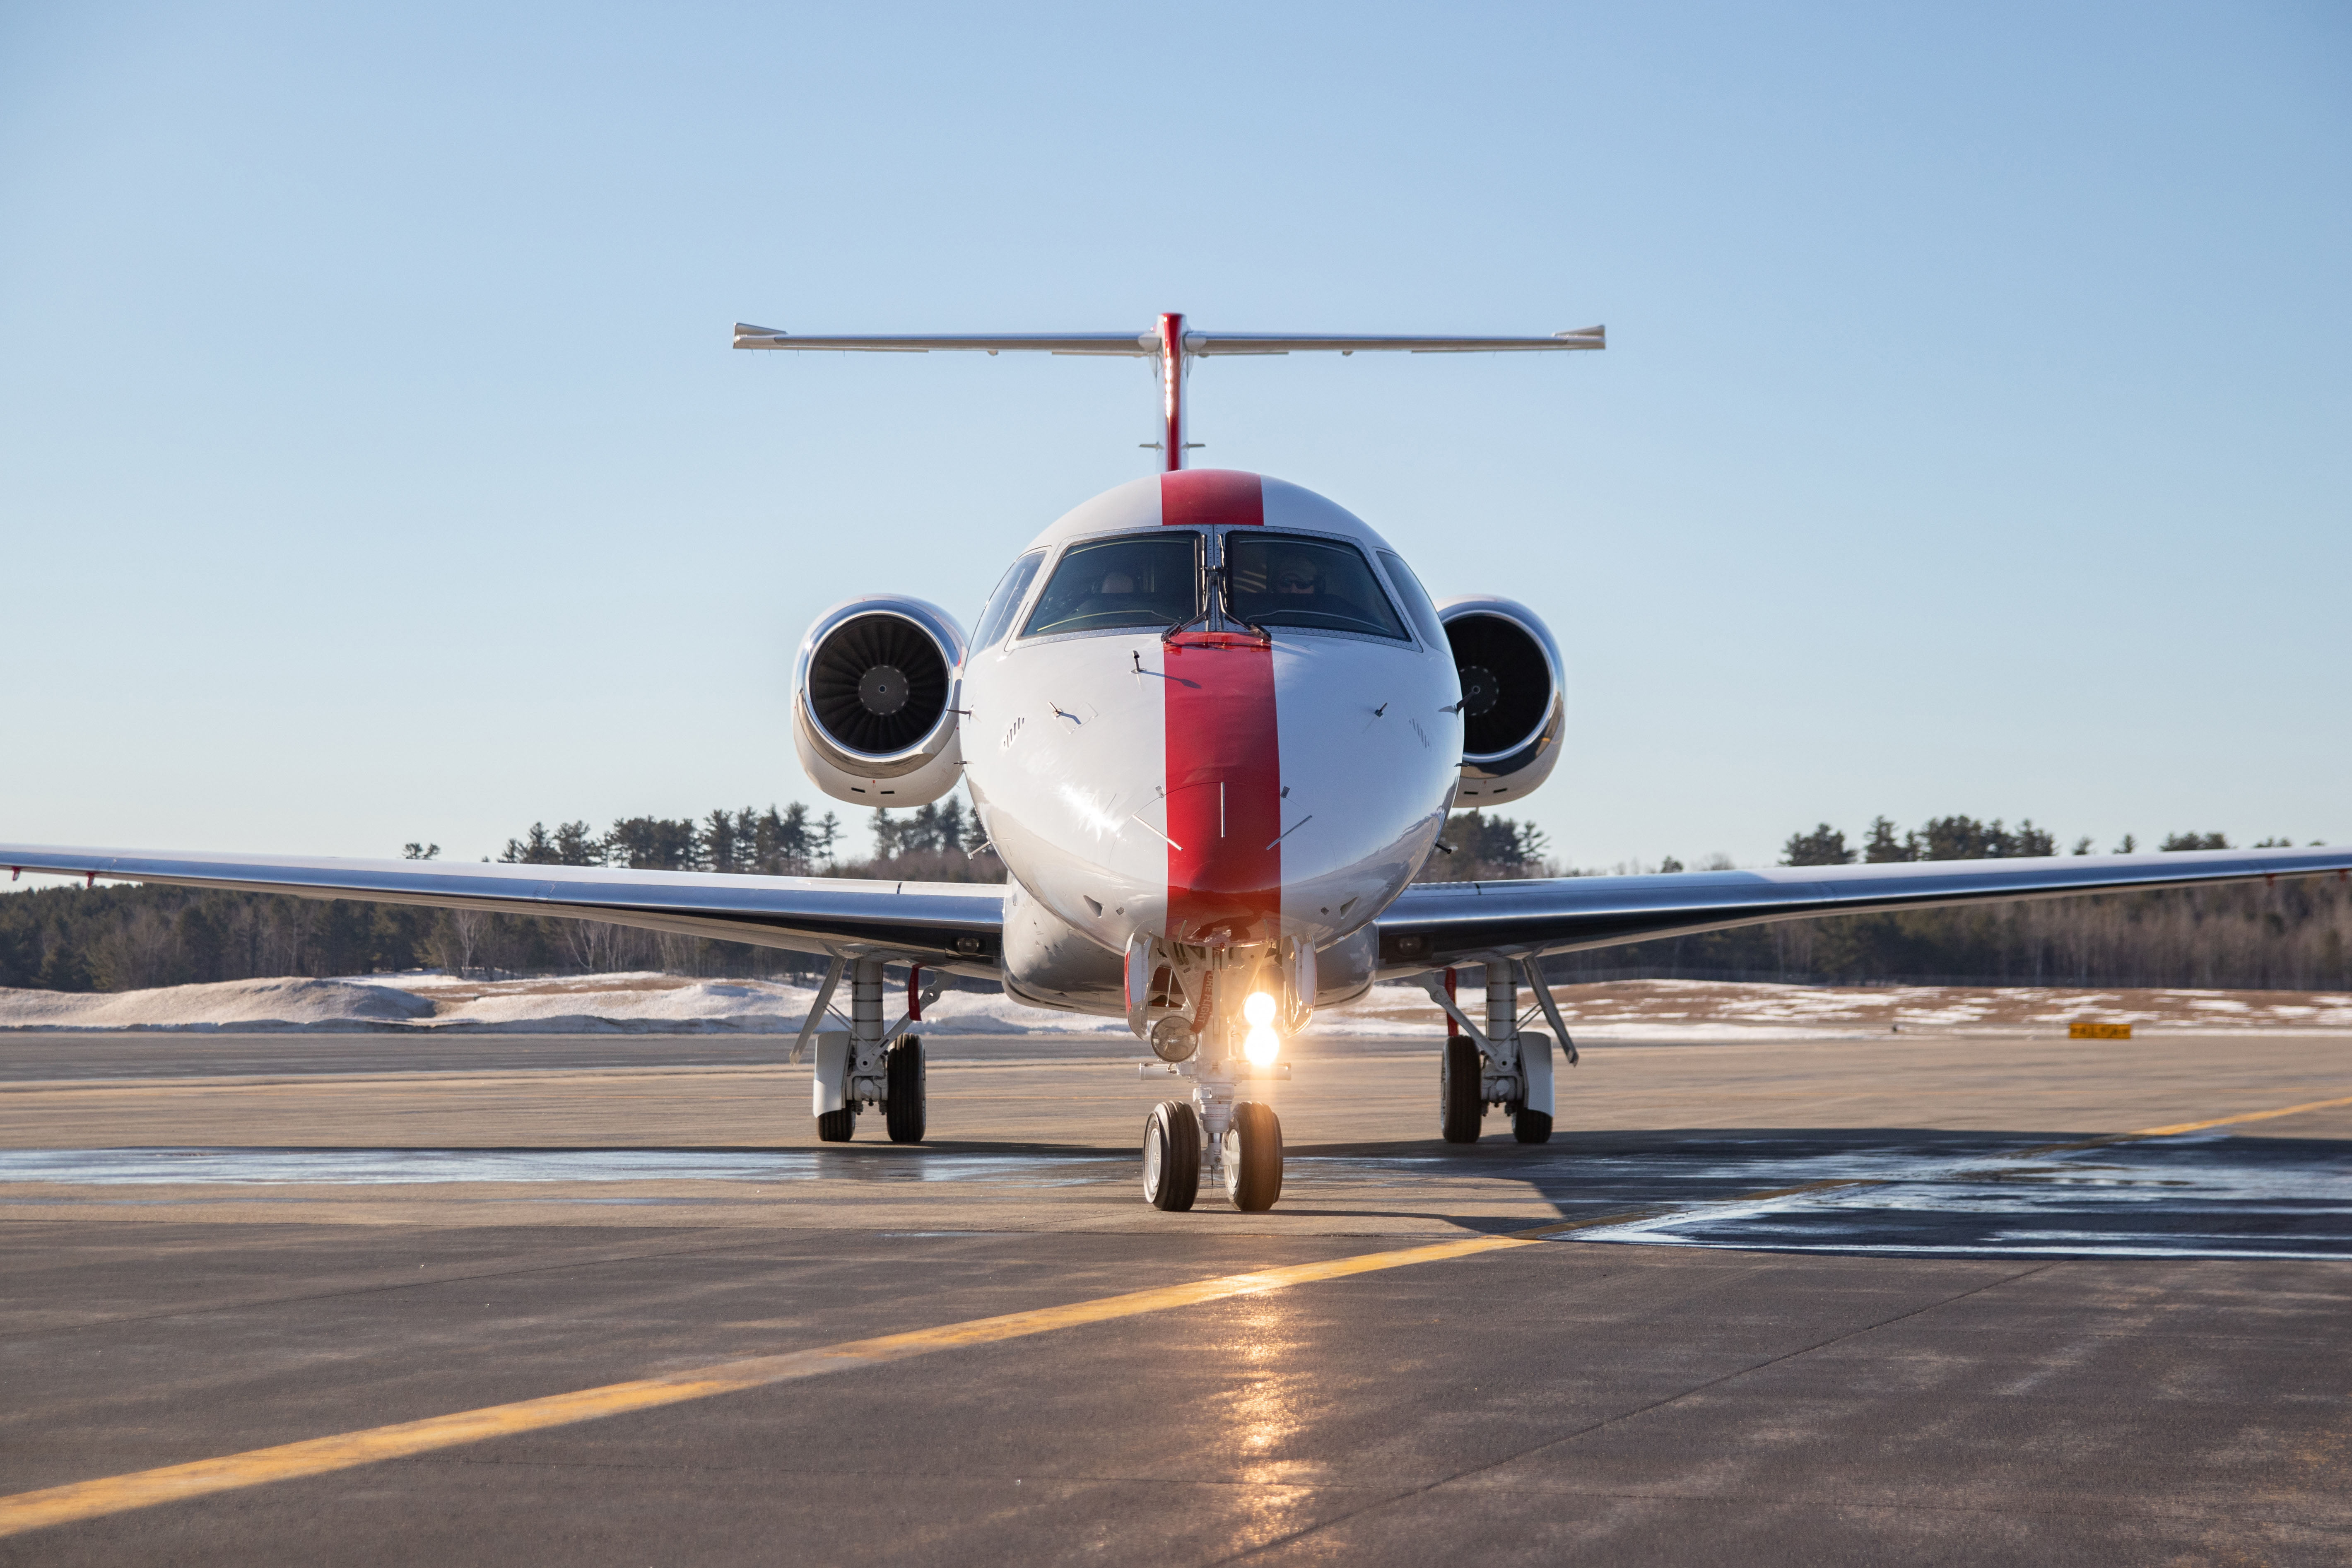 C&L Aviation Group provides ADS-B solution for JetSuiteX Fleet of E135/145 aircraft